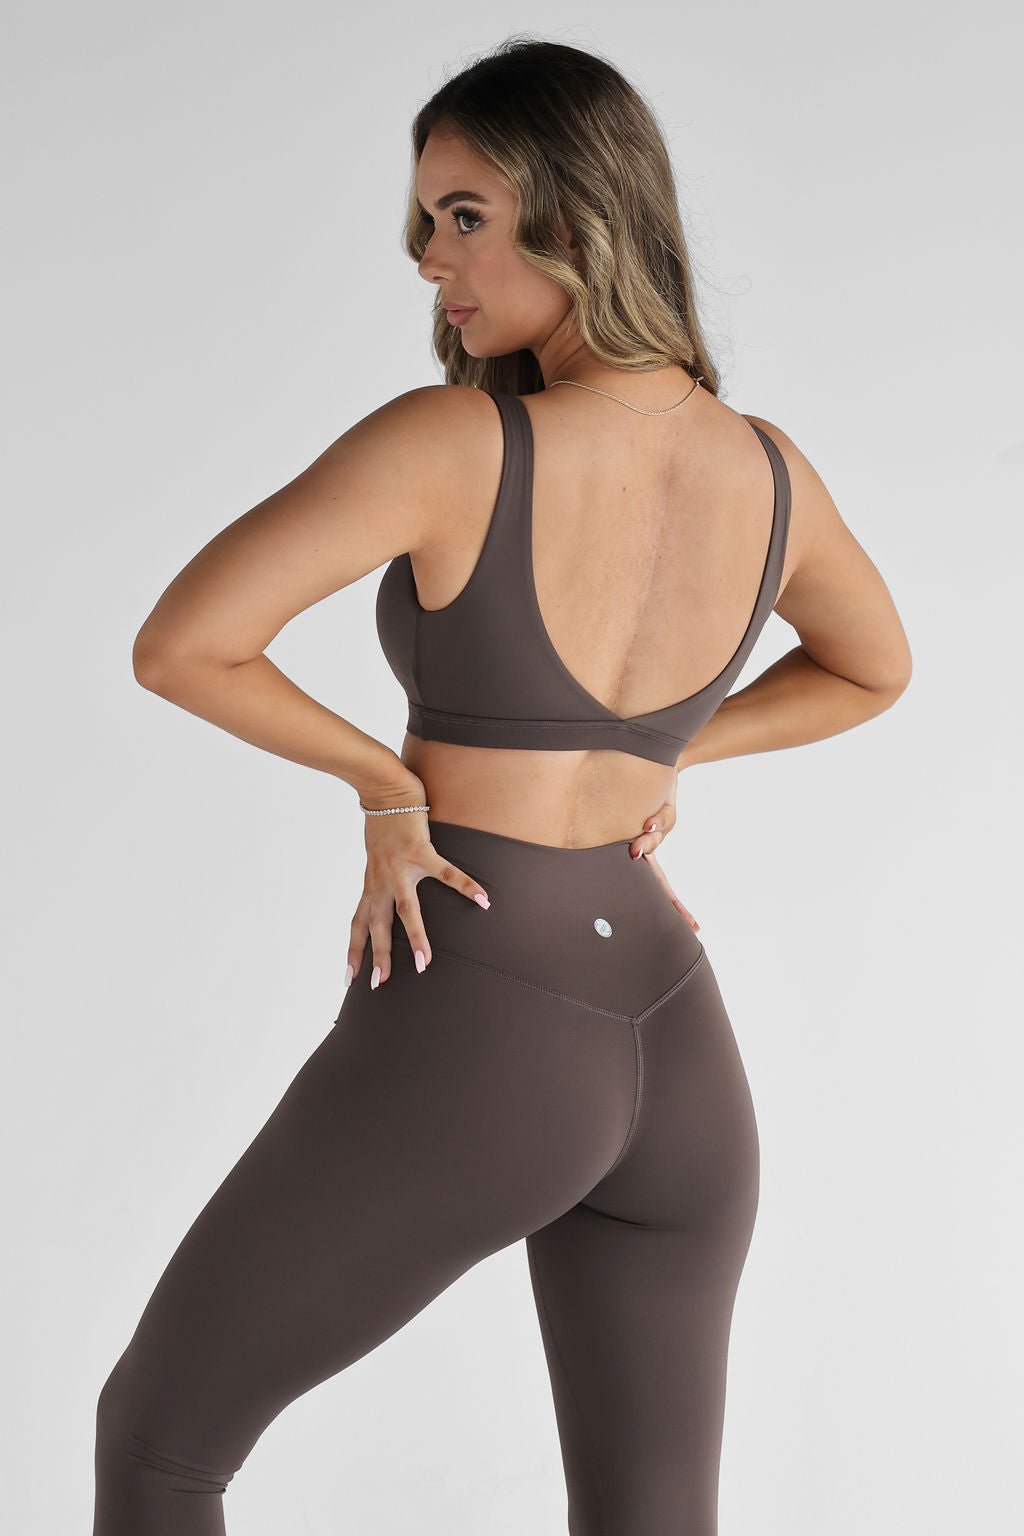 SCULPT Crop - Dark Chocolate SHIPPING FROM 23/08 - 25/08 - LEELO ACTIVE